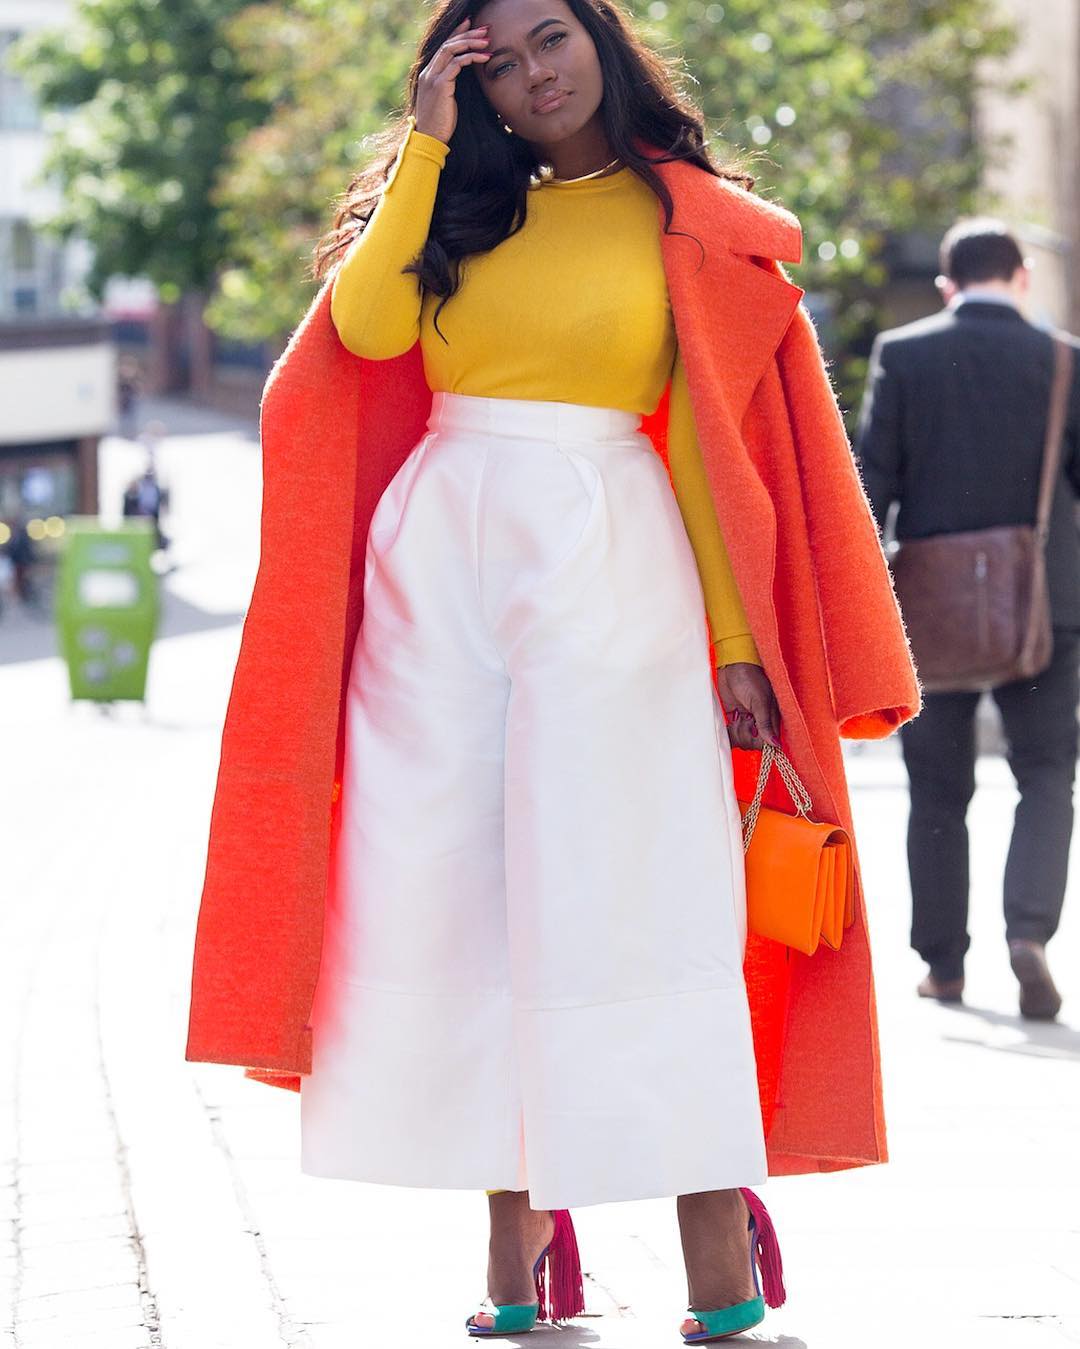 25 African Fashion Bloggers Based In The UK You Should Definitely Be  Following